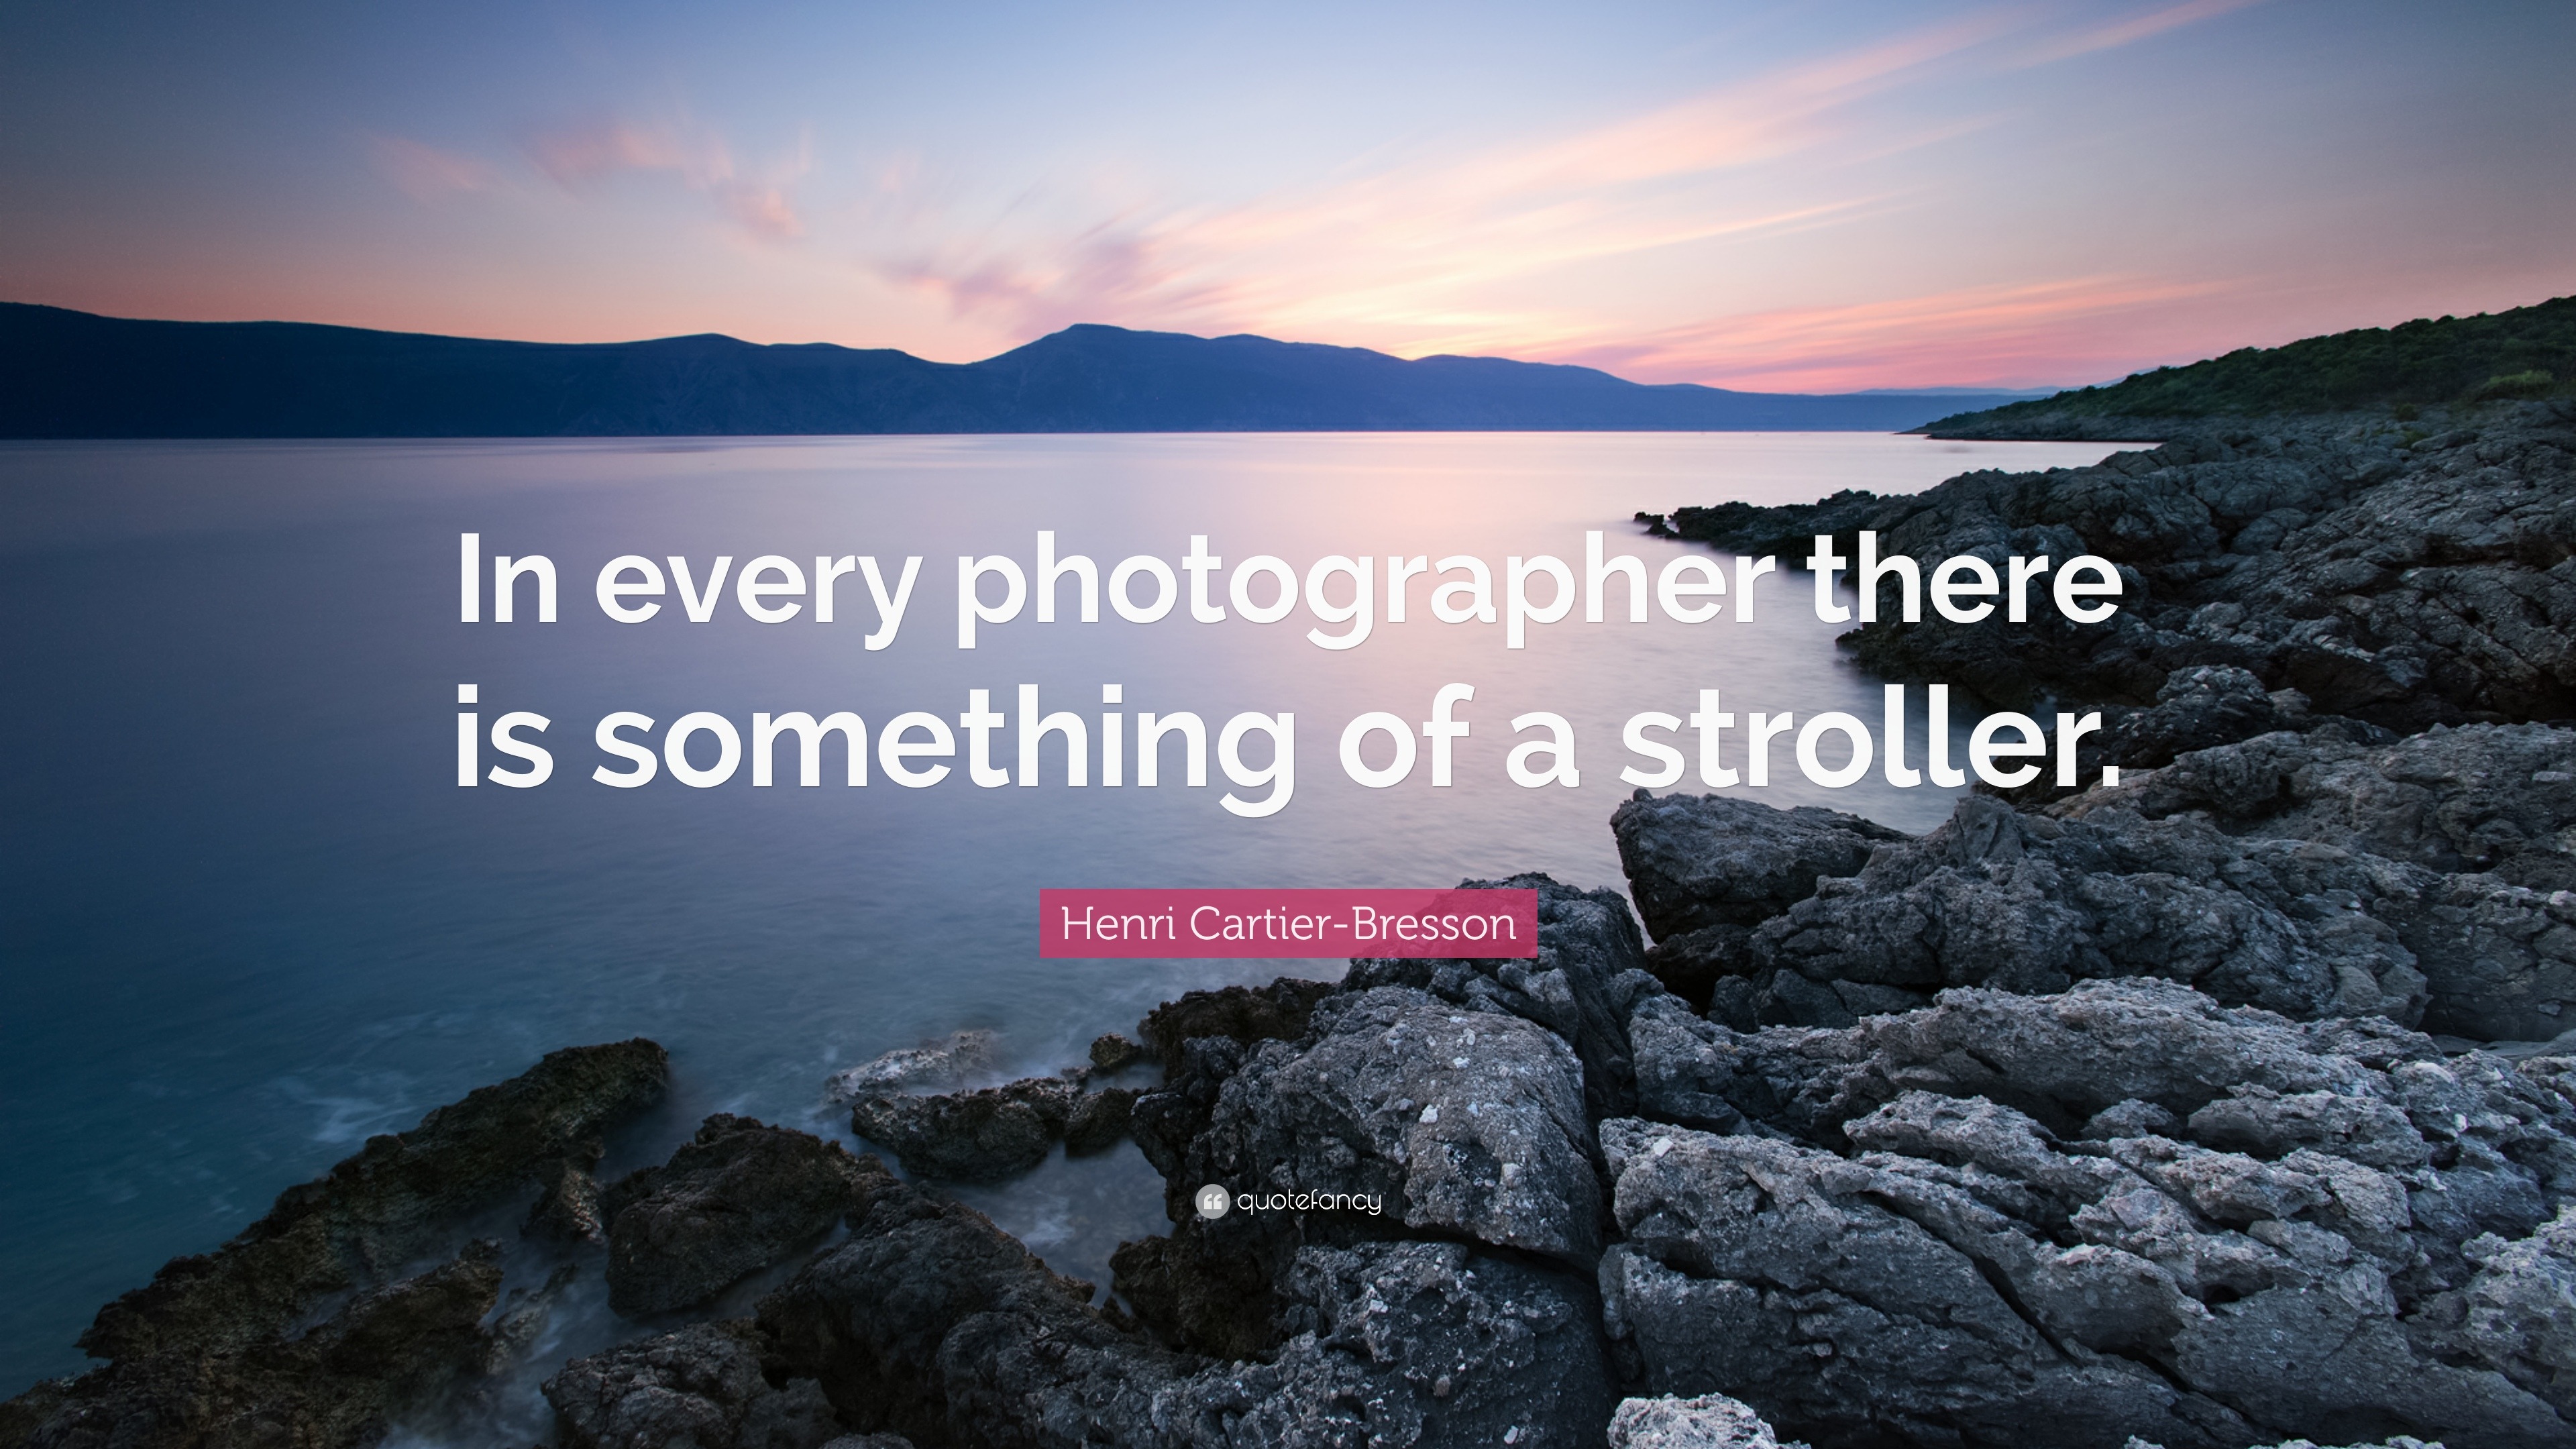 Henri Cartier-Bresson Quote: “In every photographer there is something ...